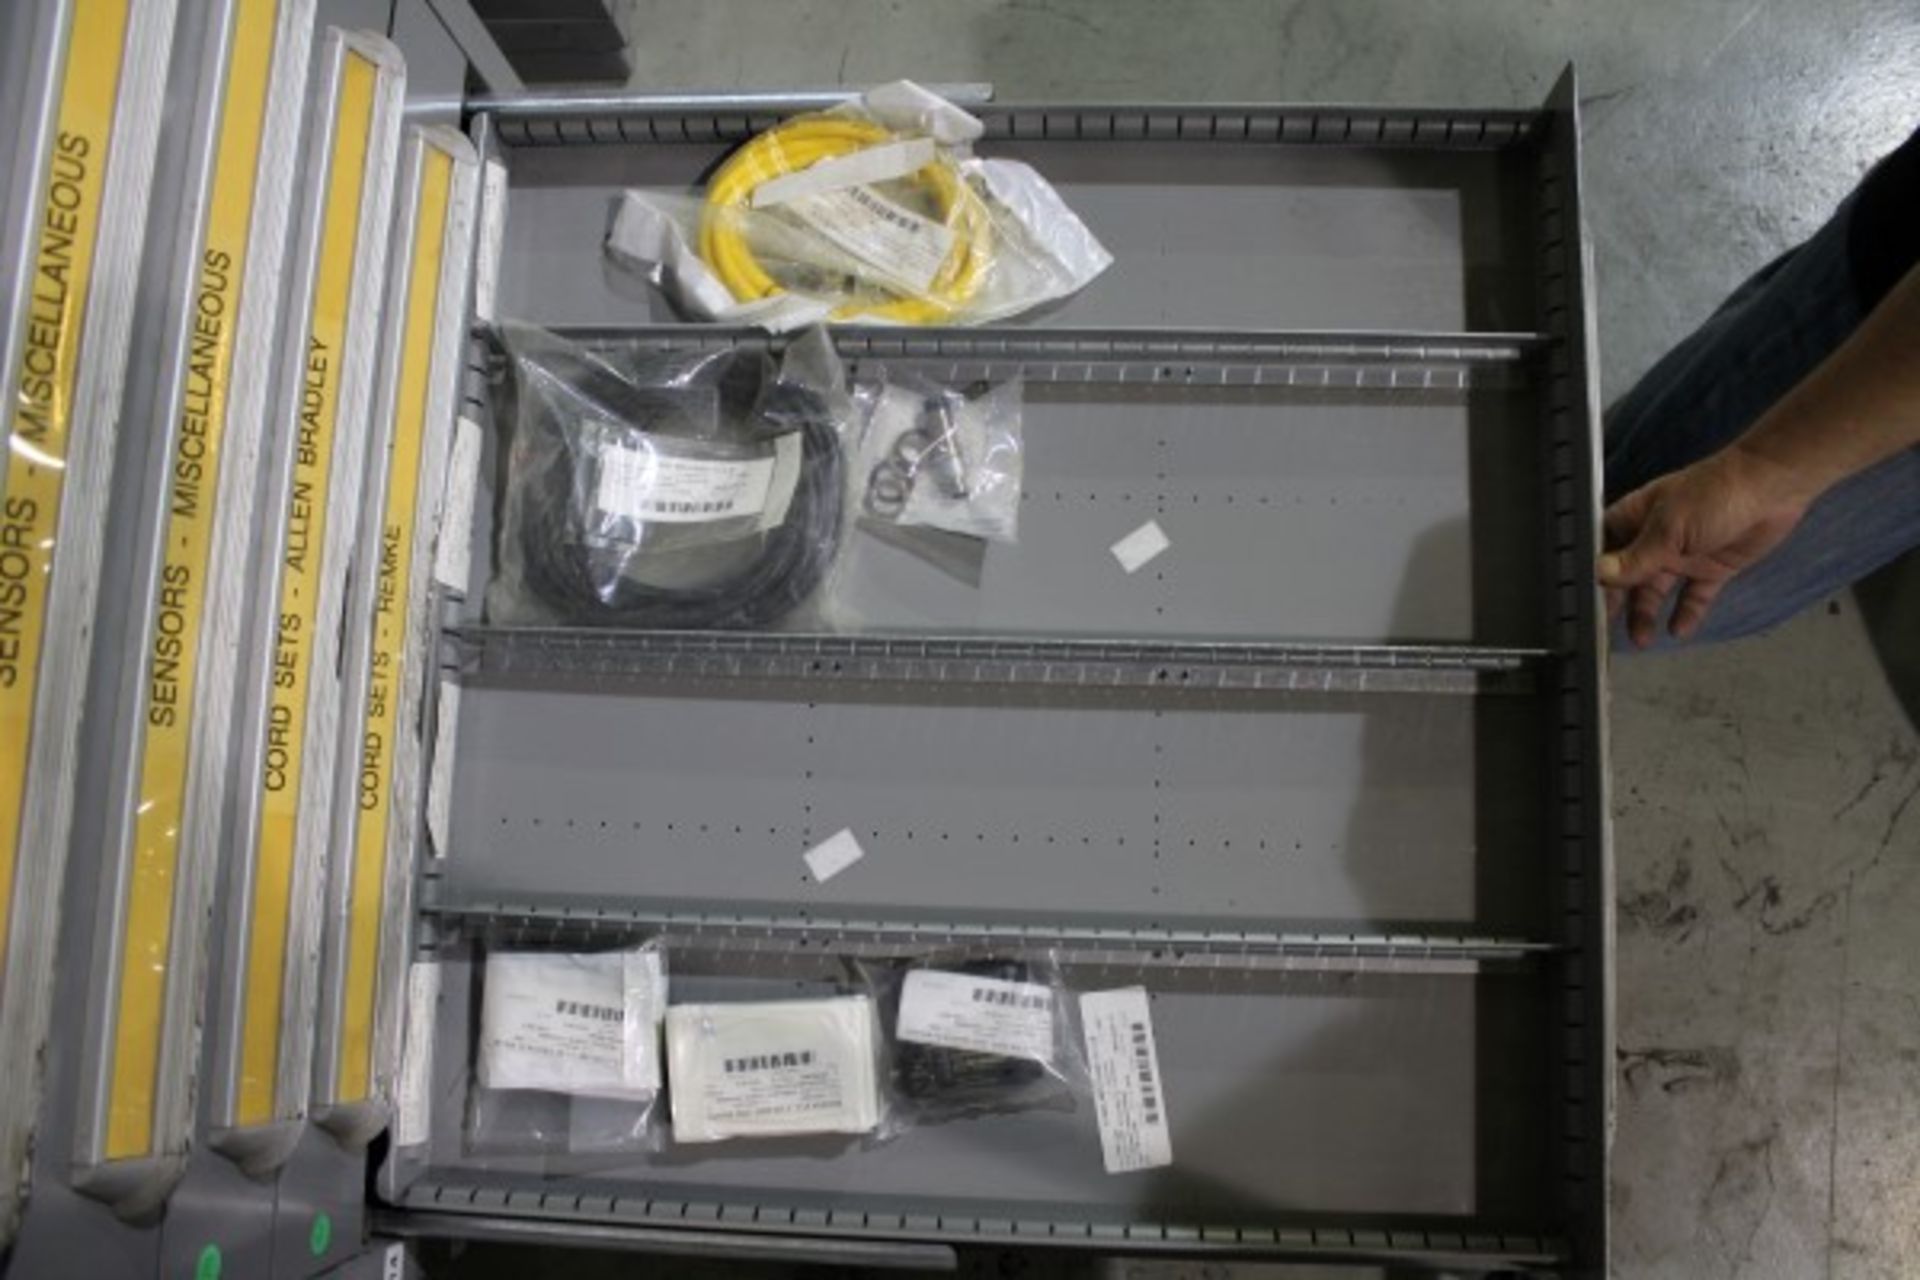 Lyon 15 Drawer Storage Cabinet, W/ Contents, Electronic & Electrical Components - Image 15 of 16